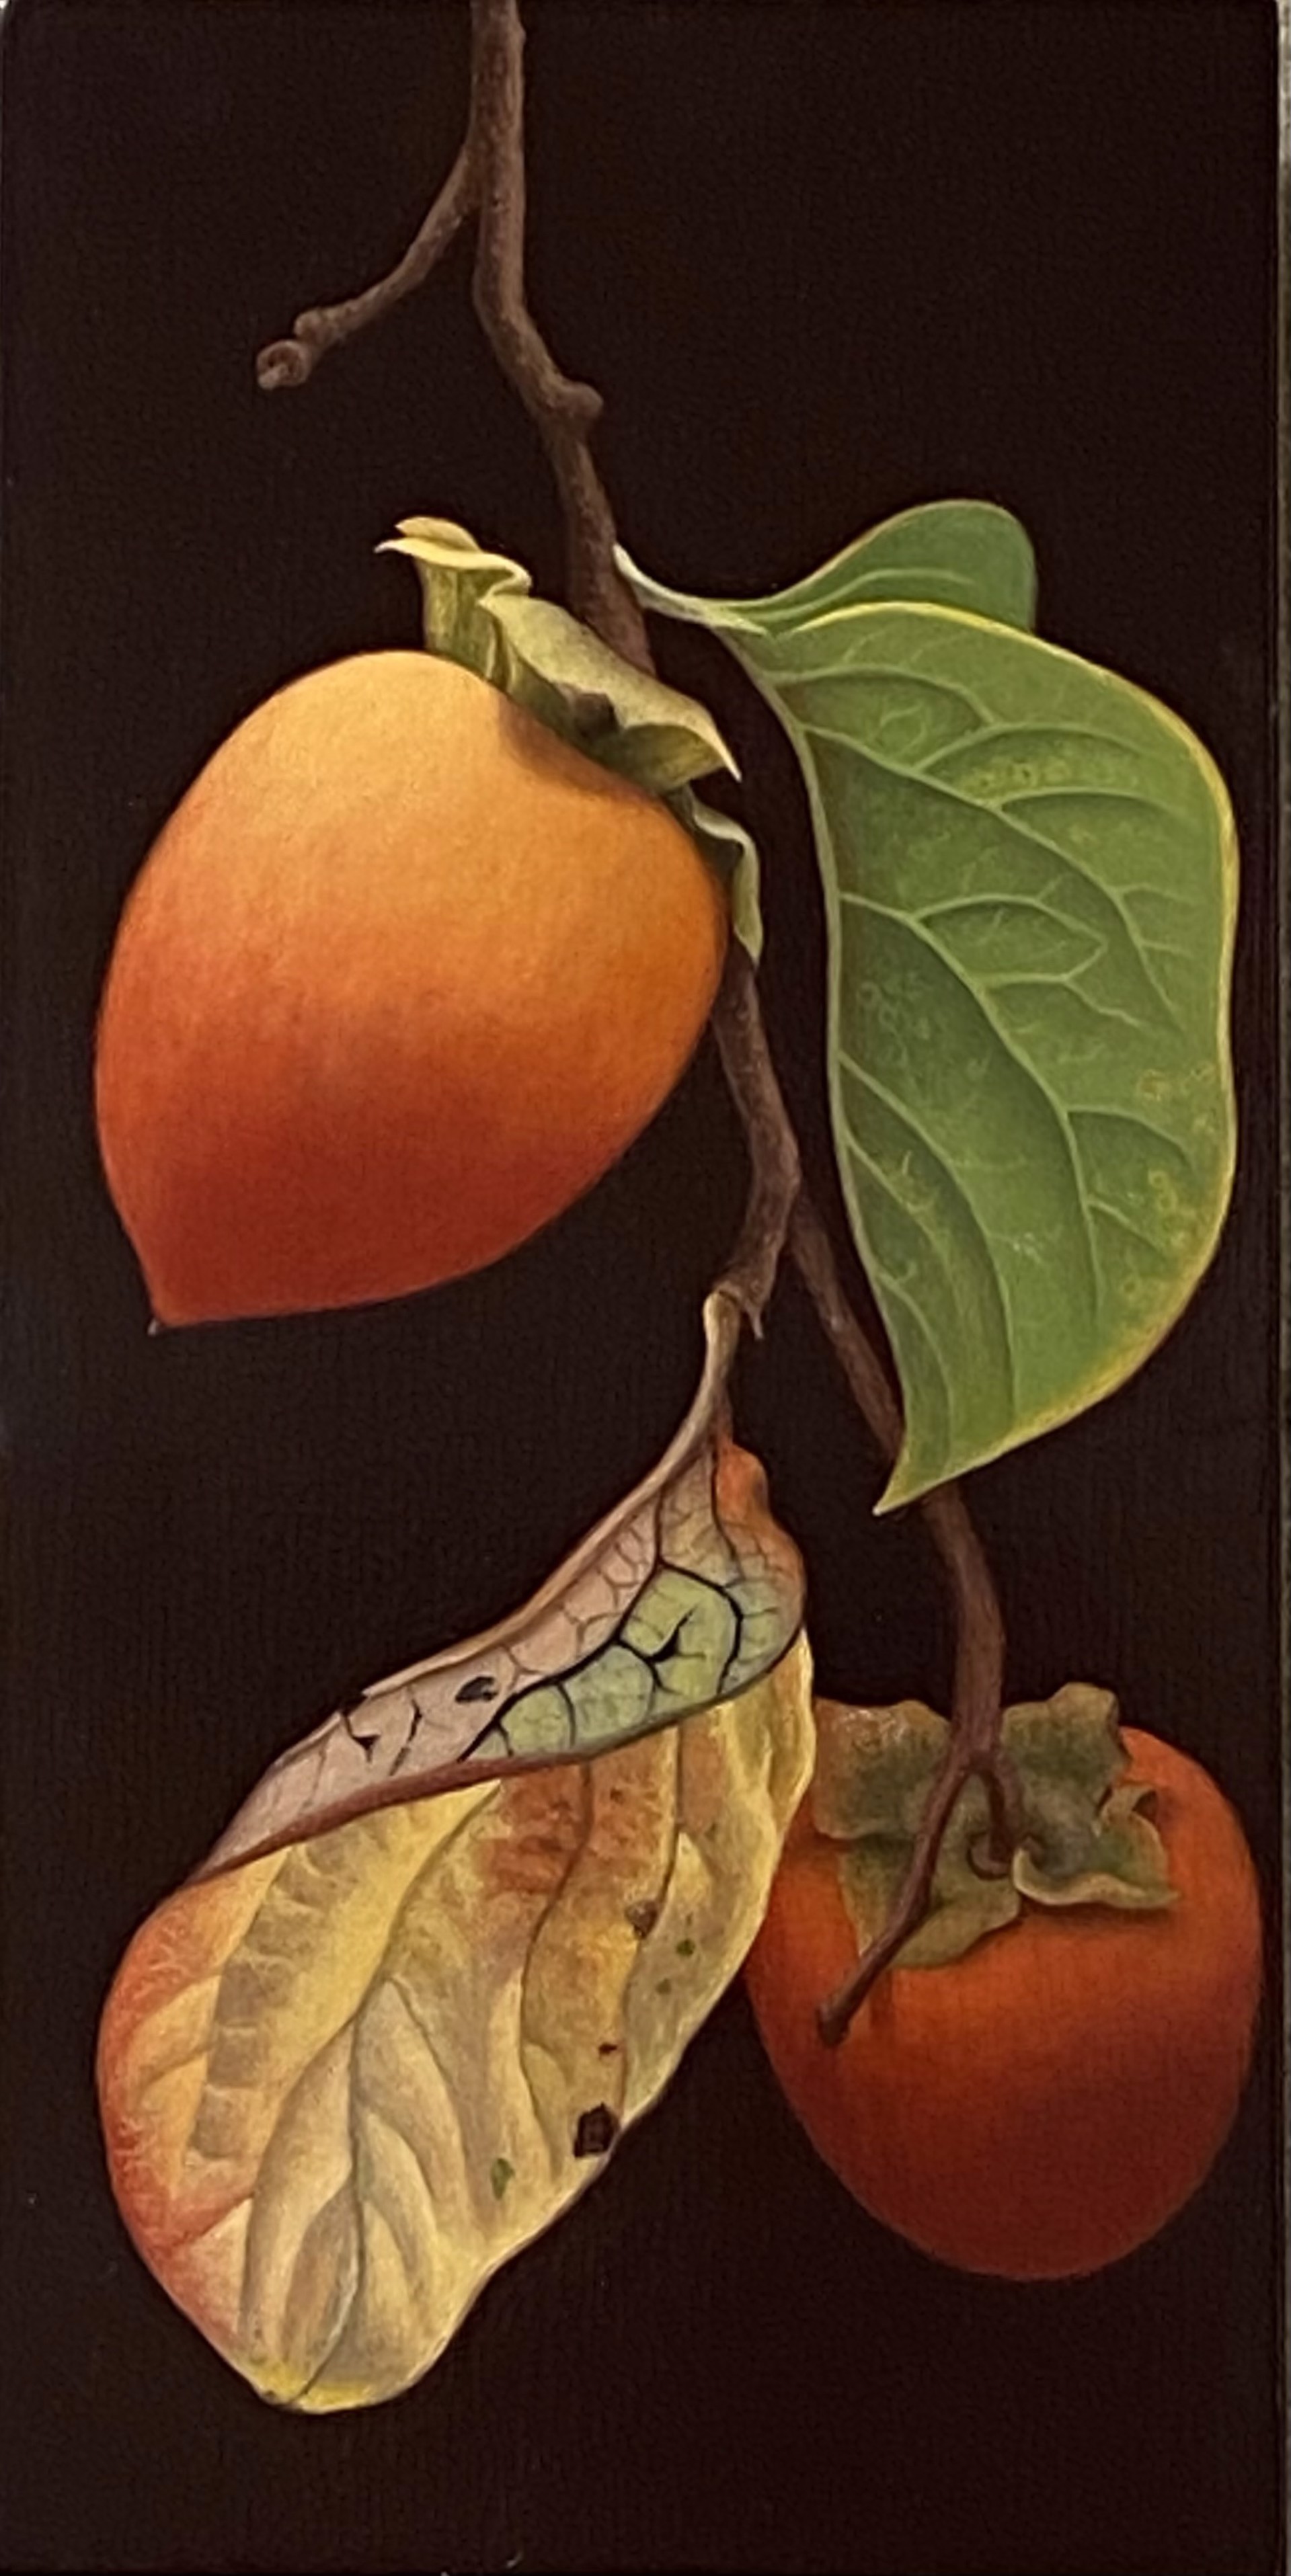 Two Persimmons by Andrea Johnson